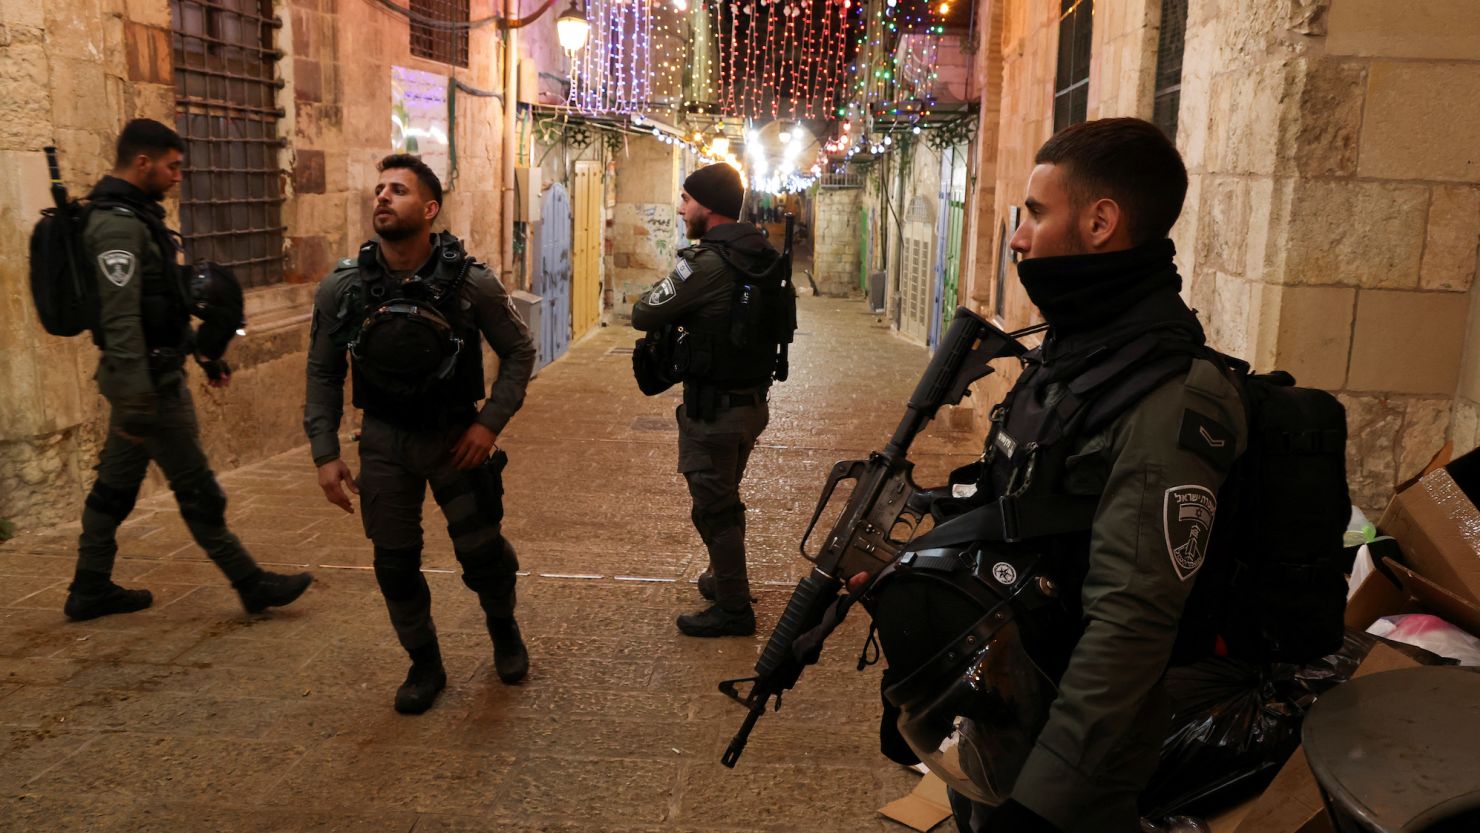 Israeli police stand guard following the fatal shooting of a Palestinian man near the Al-Aqsa compound, known to Jews as the Temple Mount, in Jerusalem's Old City, on April 1, 2023.